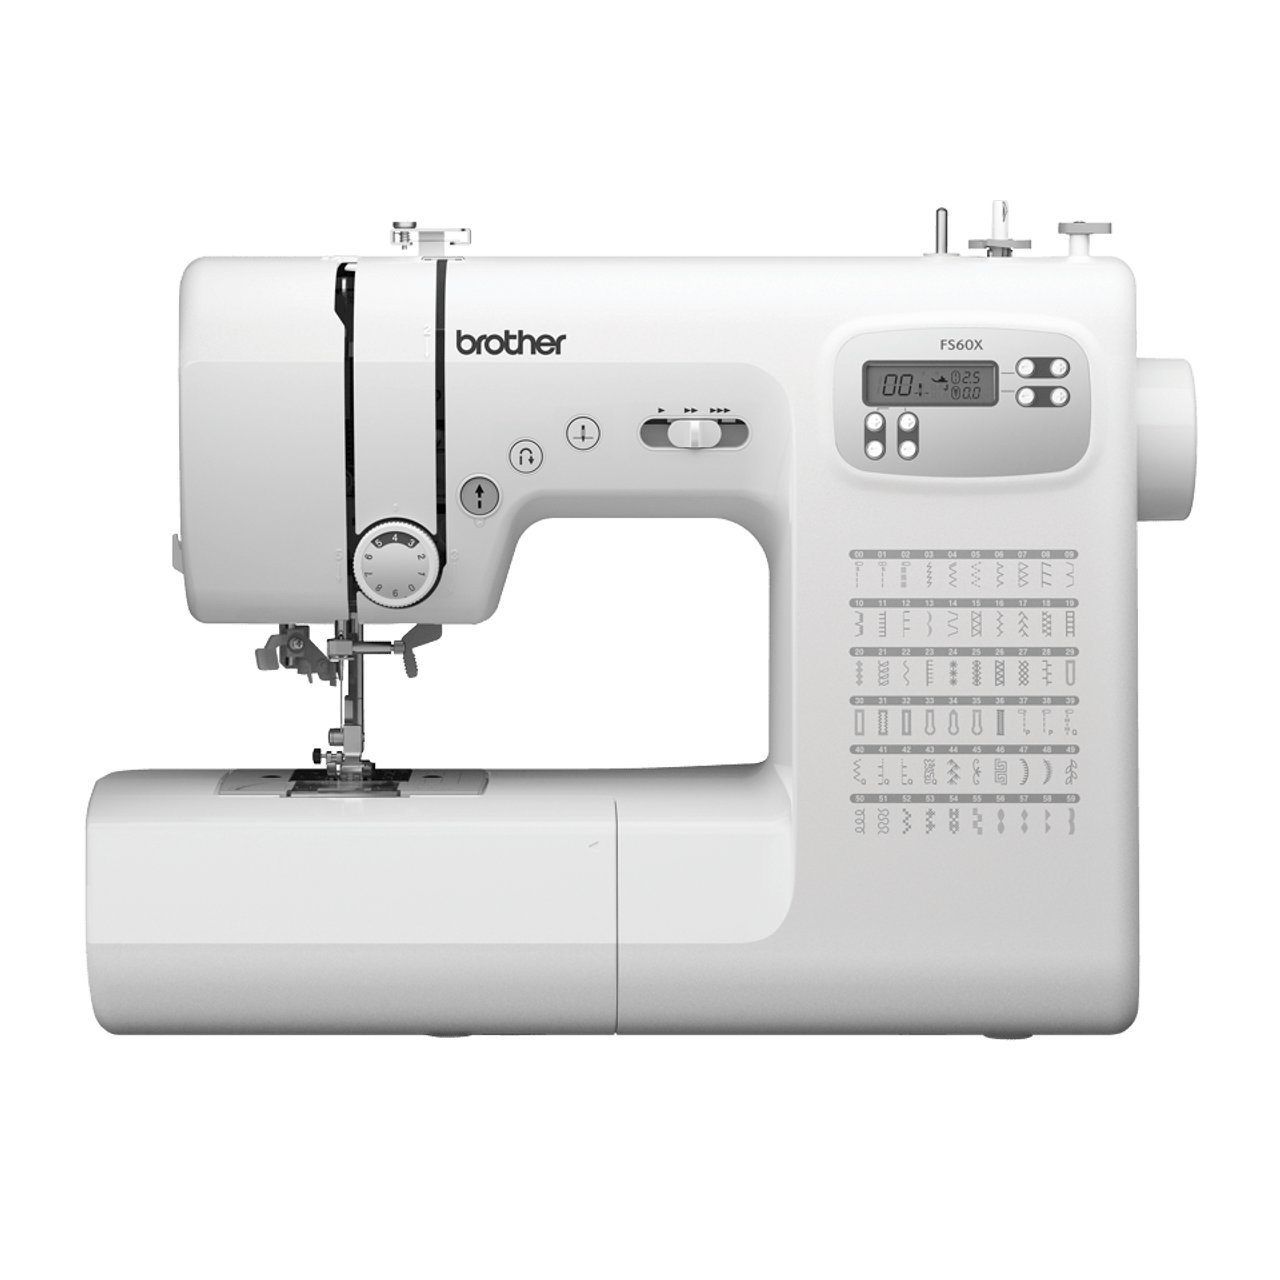 Brother FS60X Extra tough sewing machine